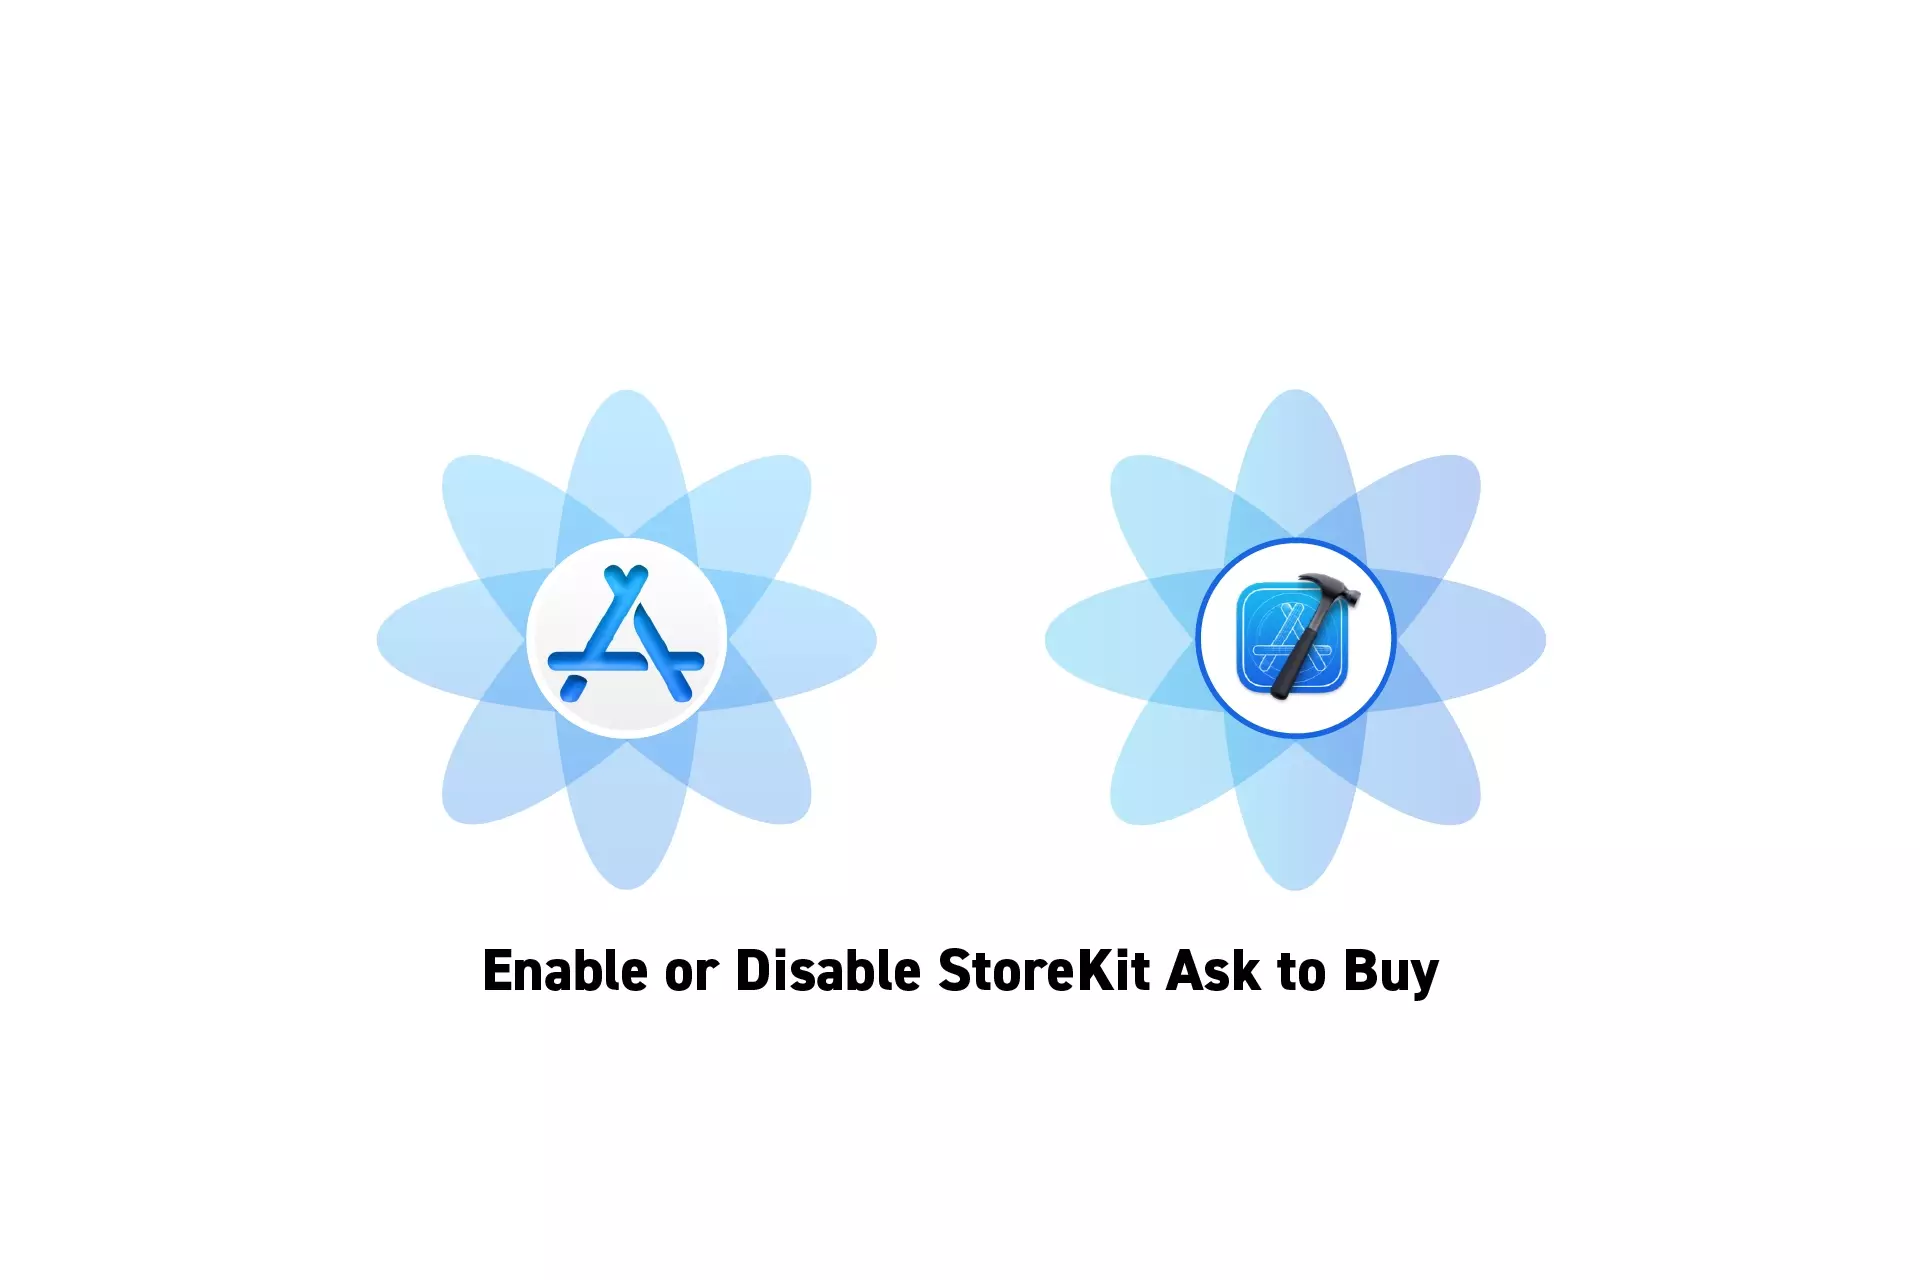 Two flowers that represent StoreKit and Xcode side by side with the text "Enable or Disable StoreKit Ask to Buy."